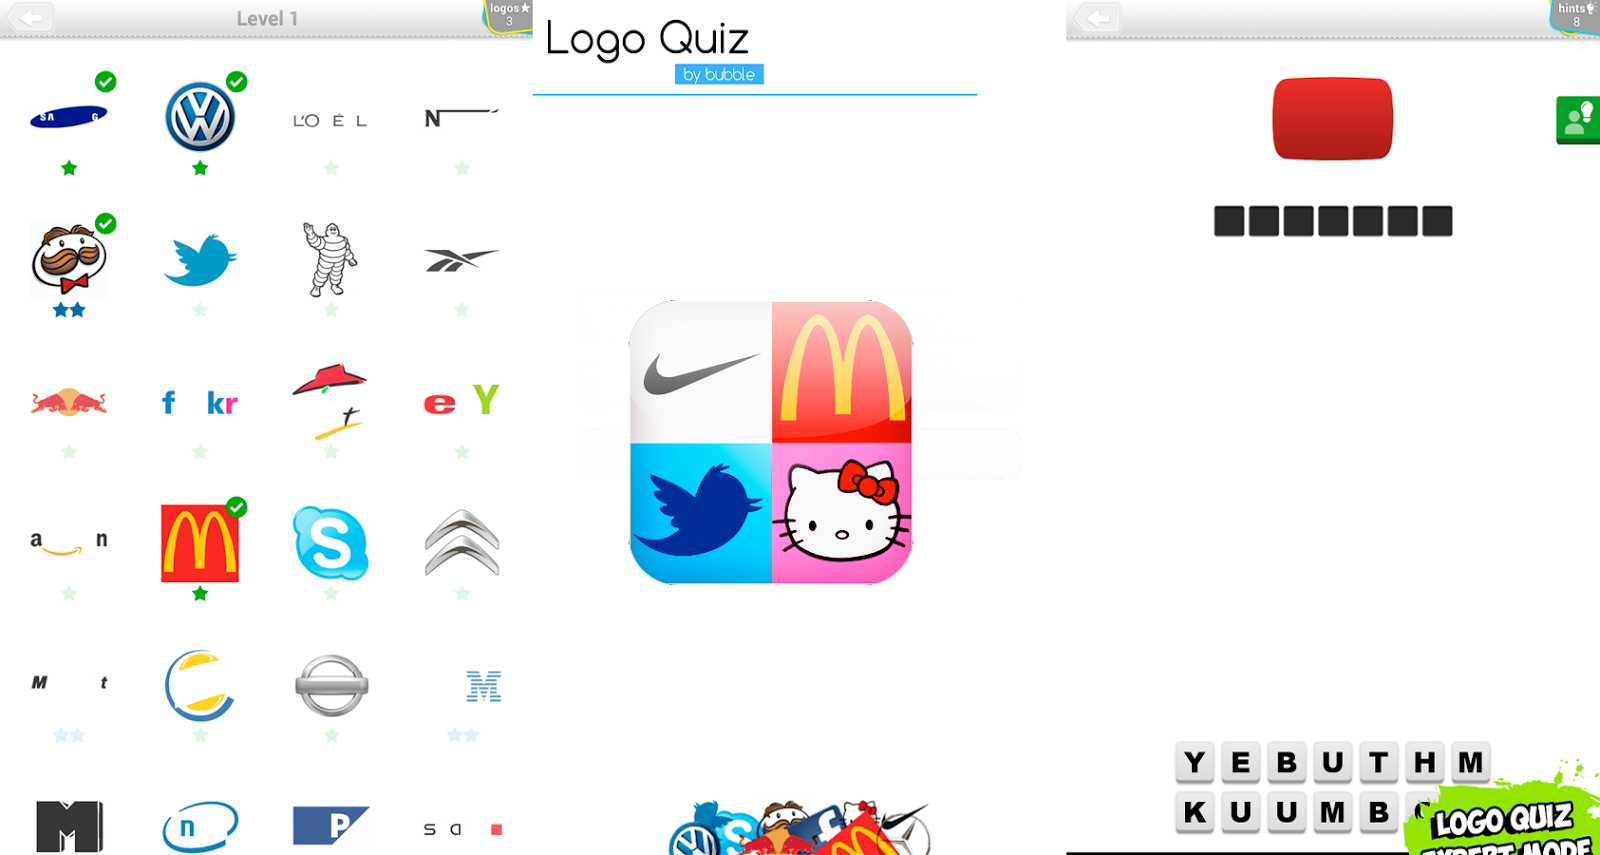 Logo Quiz! - Cars Level 4 Answers by Candy Logo ~ Doors Geek